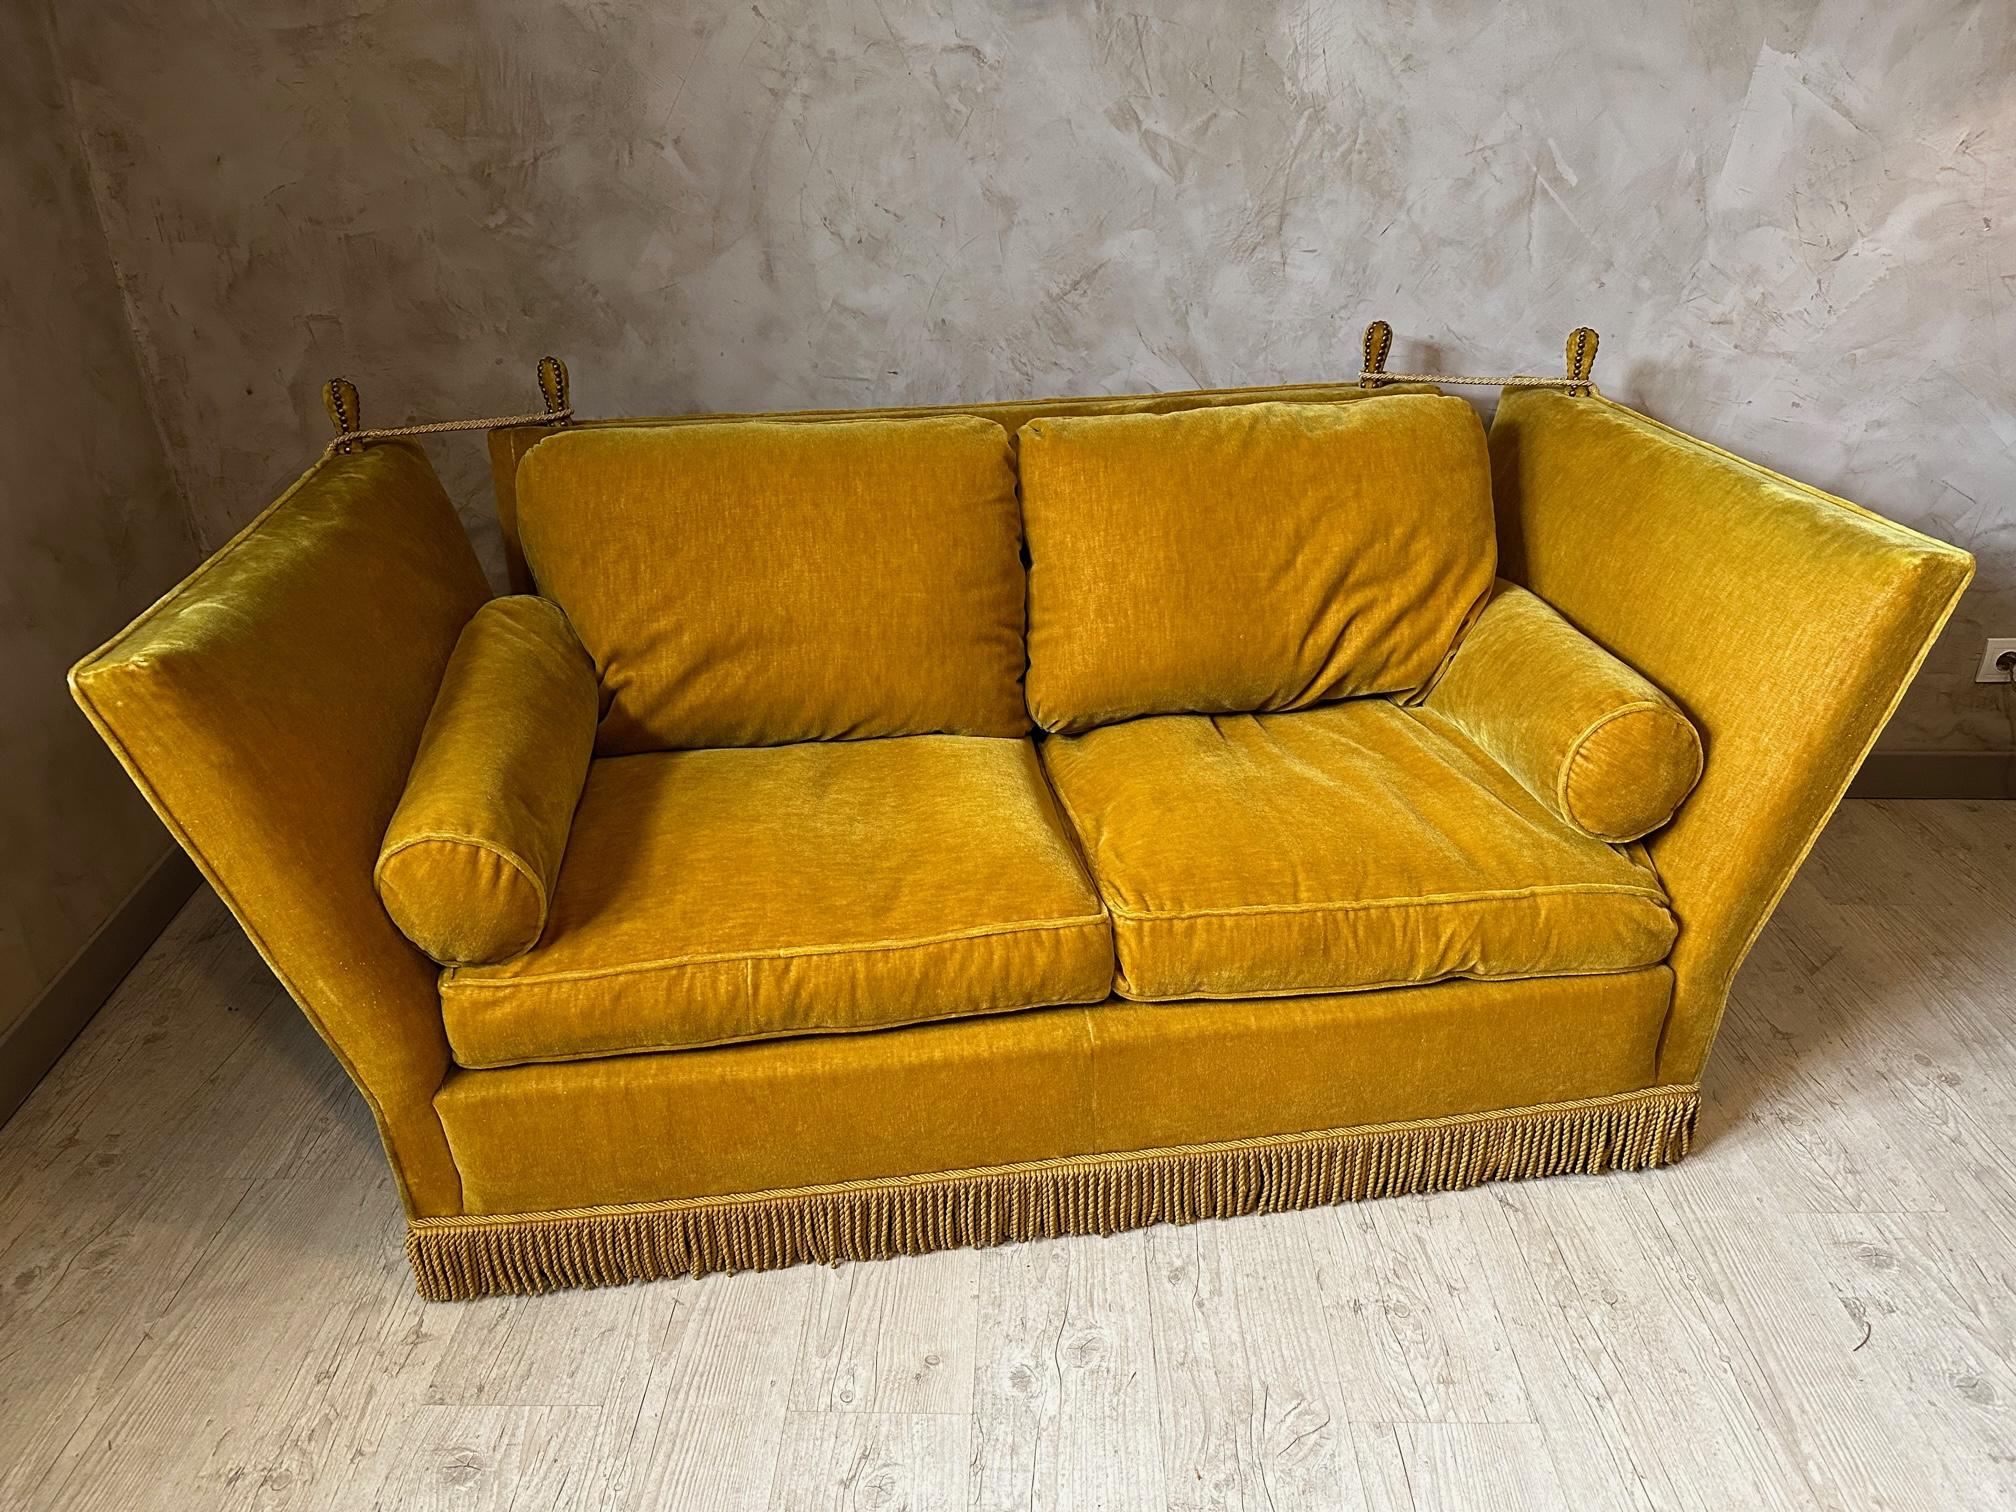 Superb two-seater sofa called 